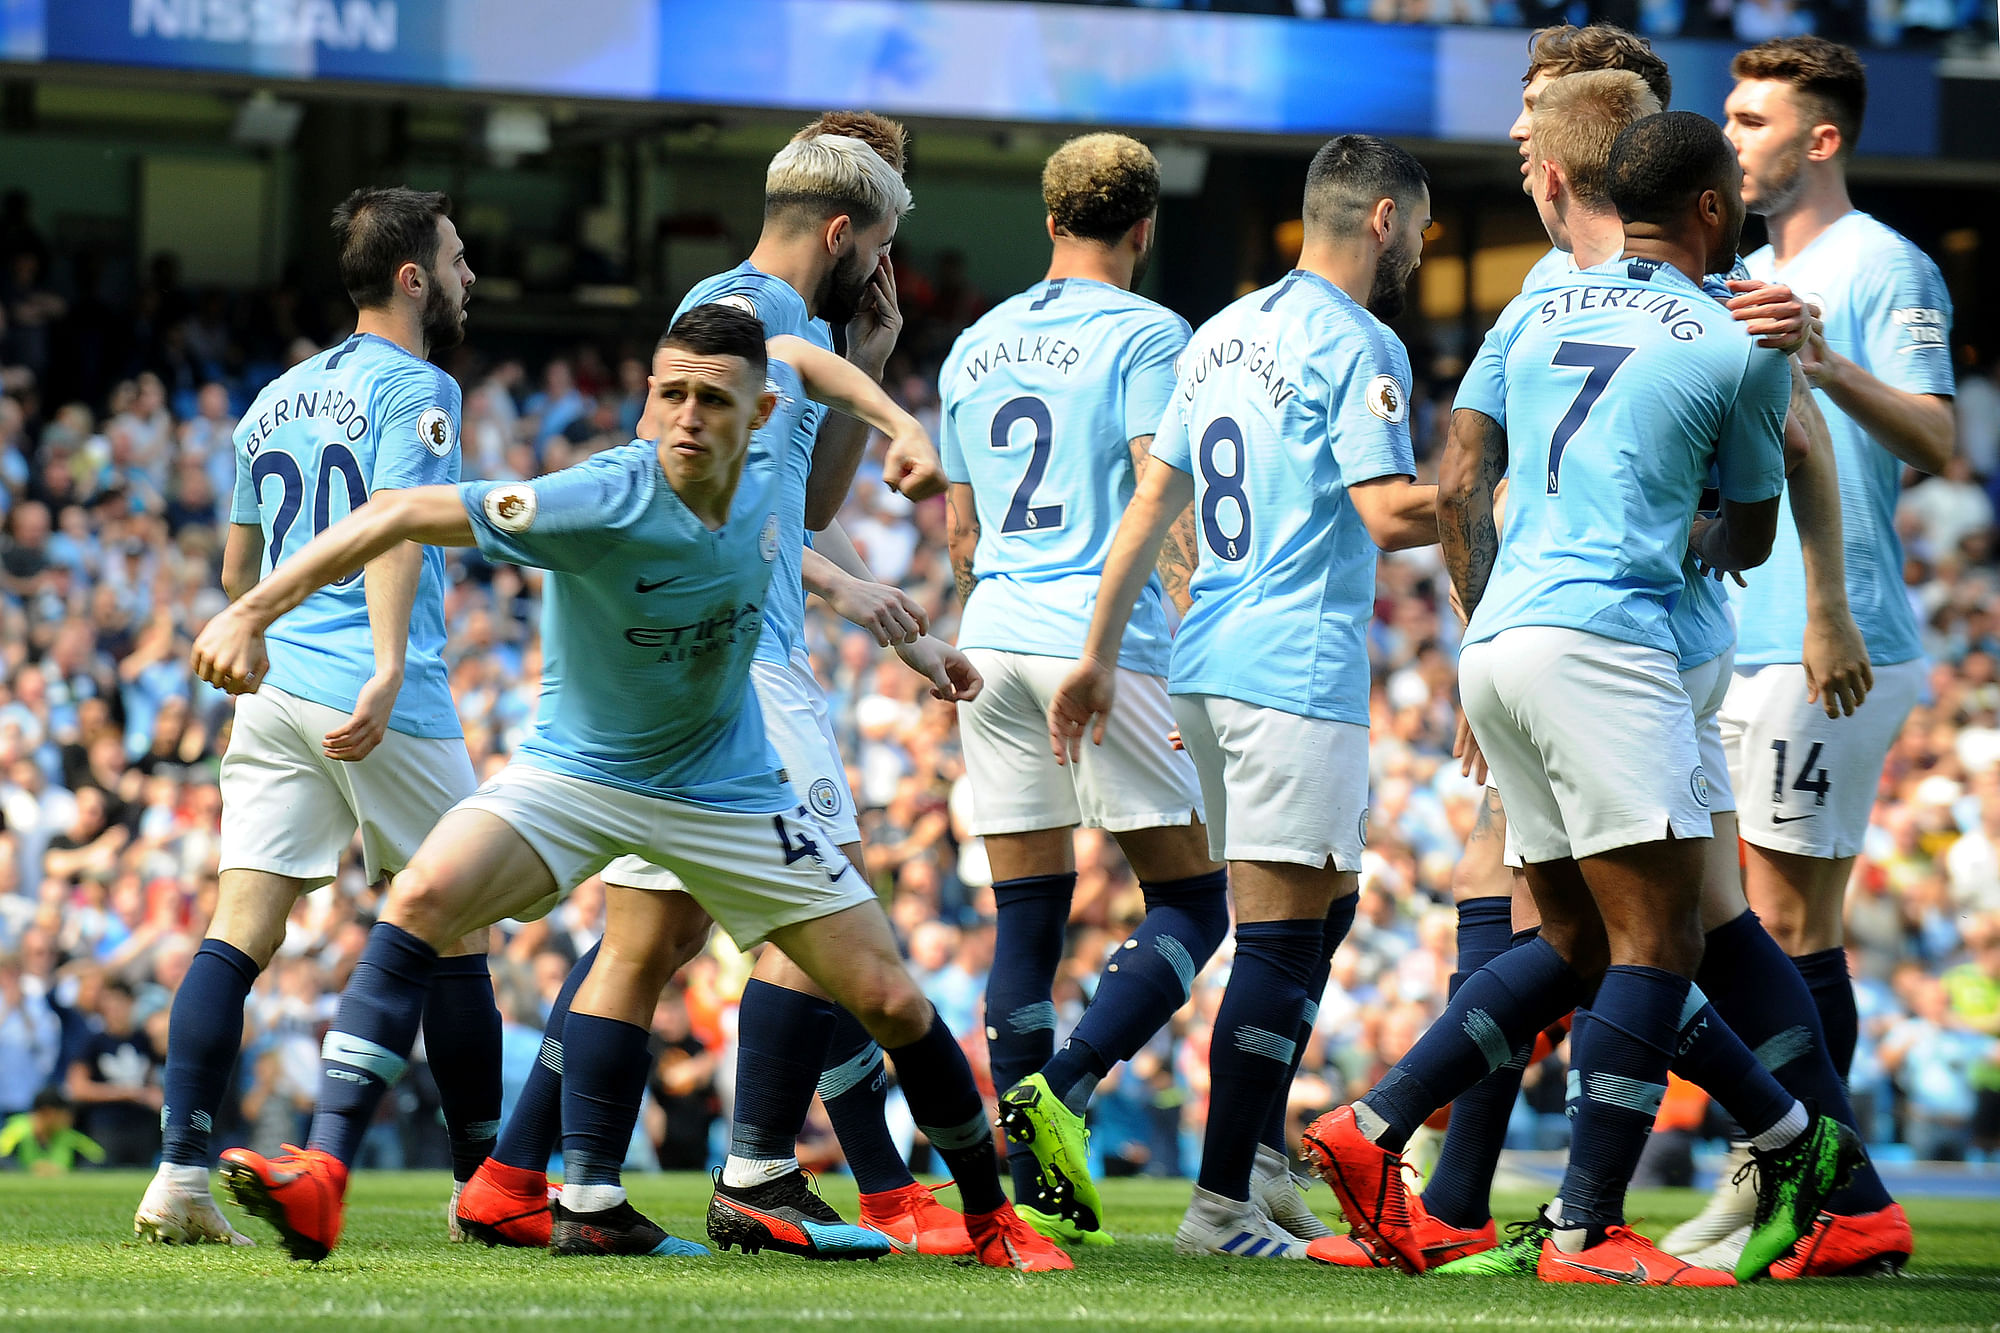 Phil Foden scored his first Premier League goal for Manchester City to seal a 1-0 victory over Tottenham.